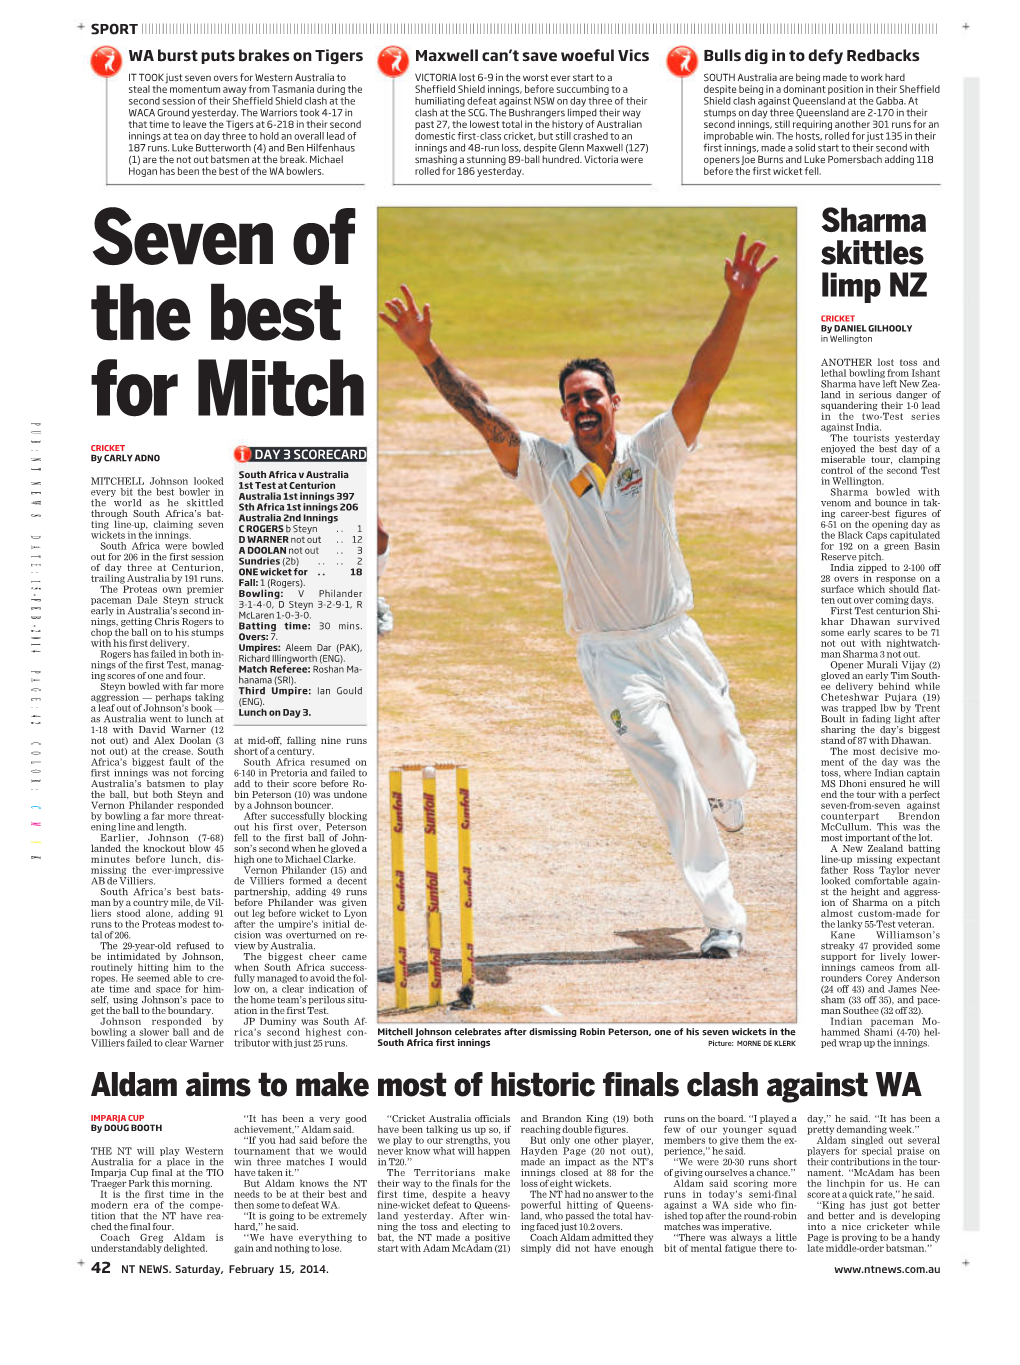 Seven of the Best for Mitch